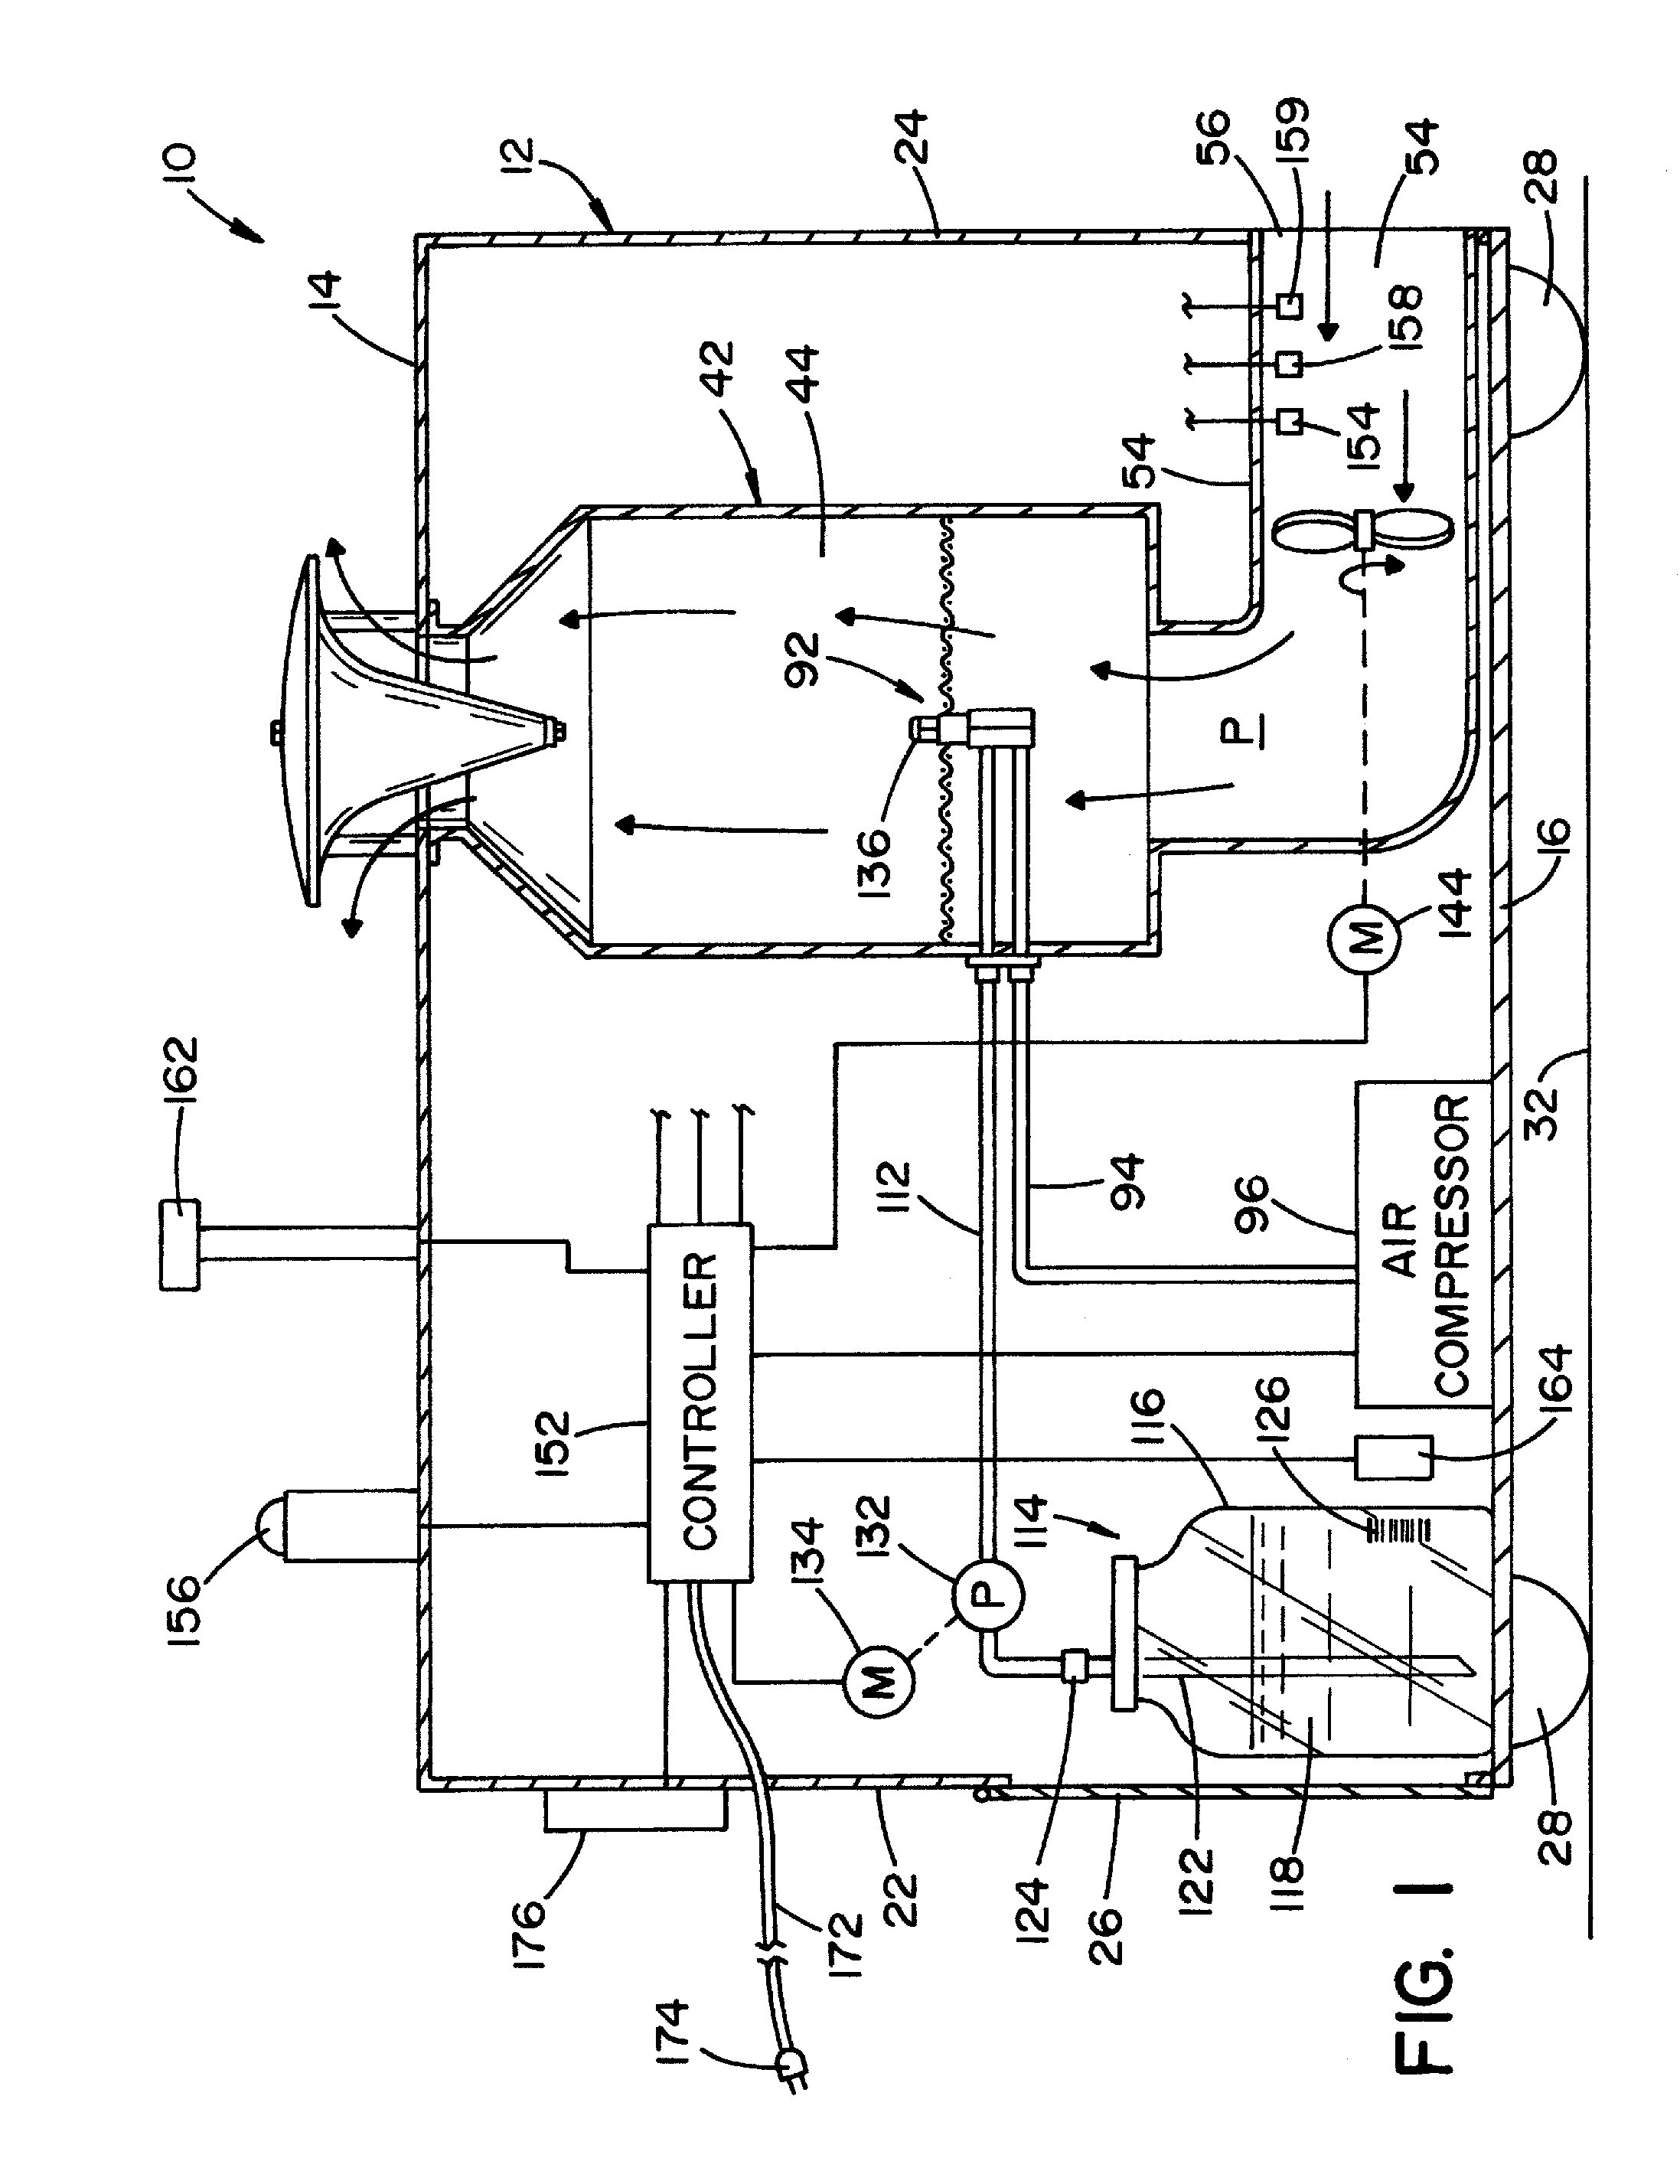 Cold-mist decontamination unit and method of operating same